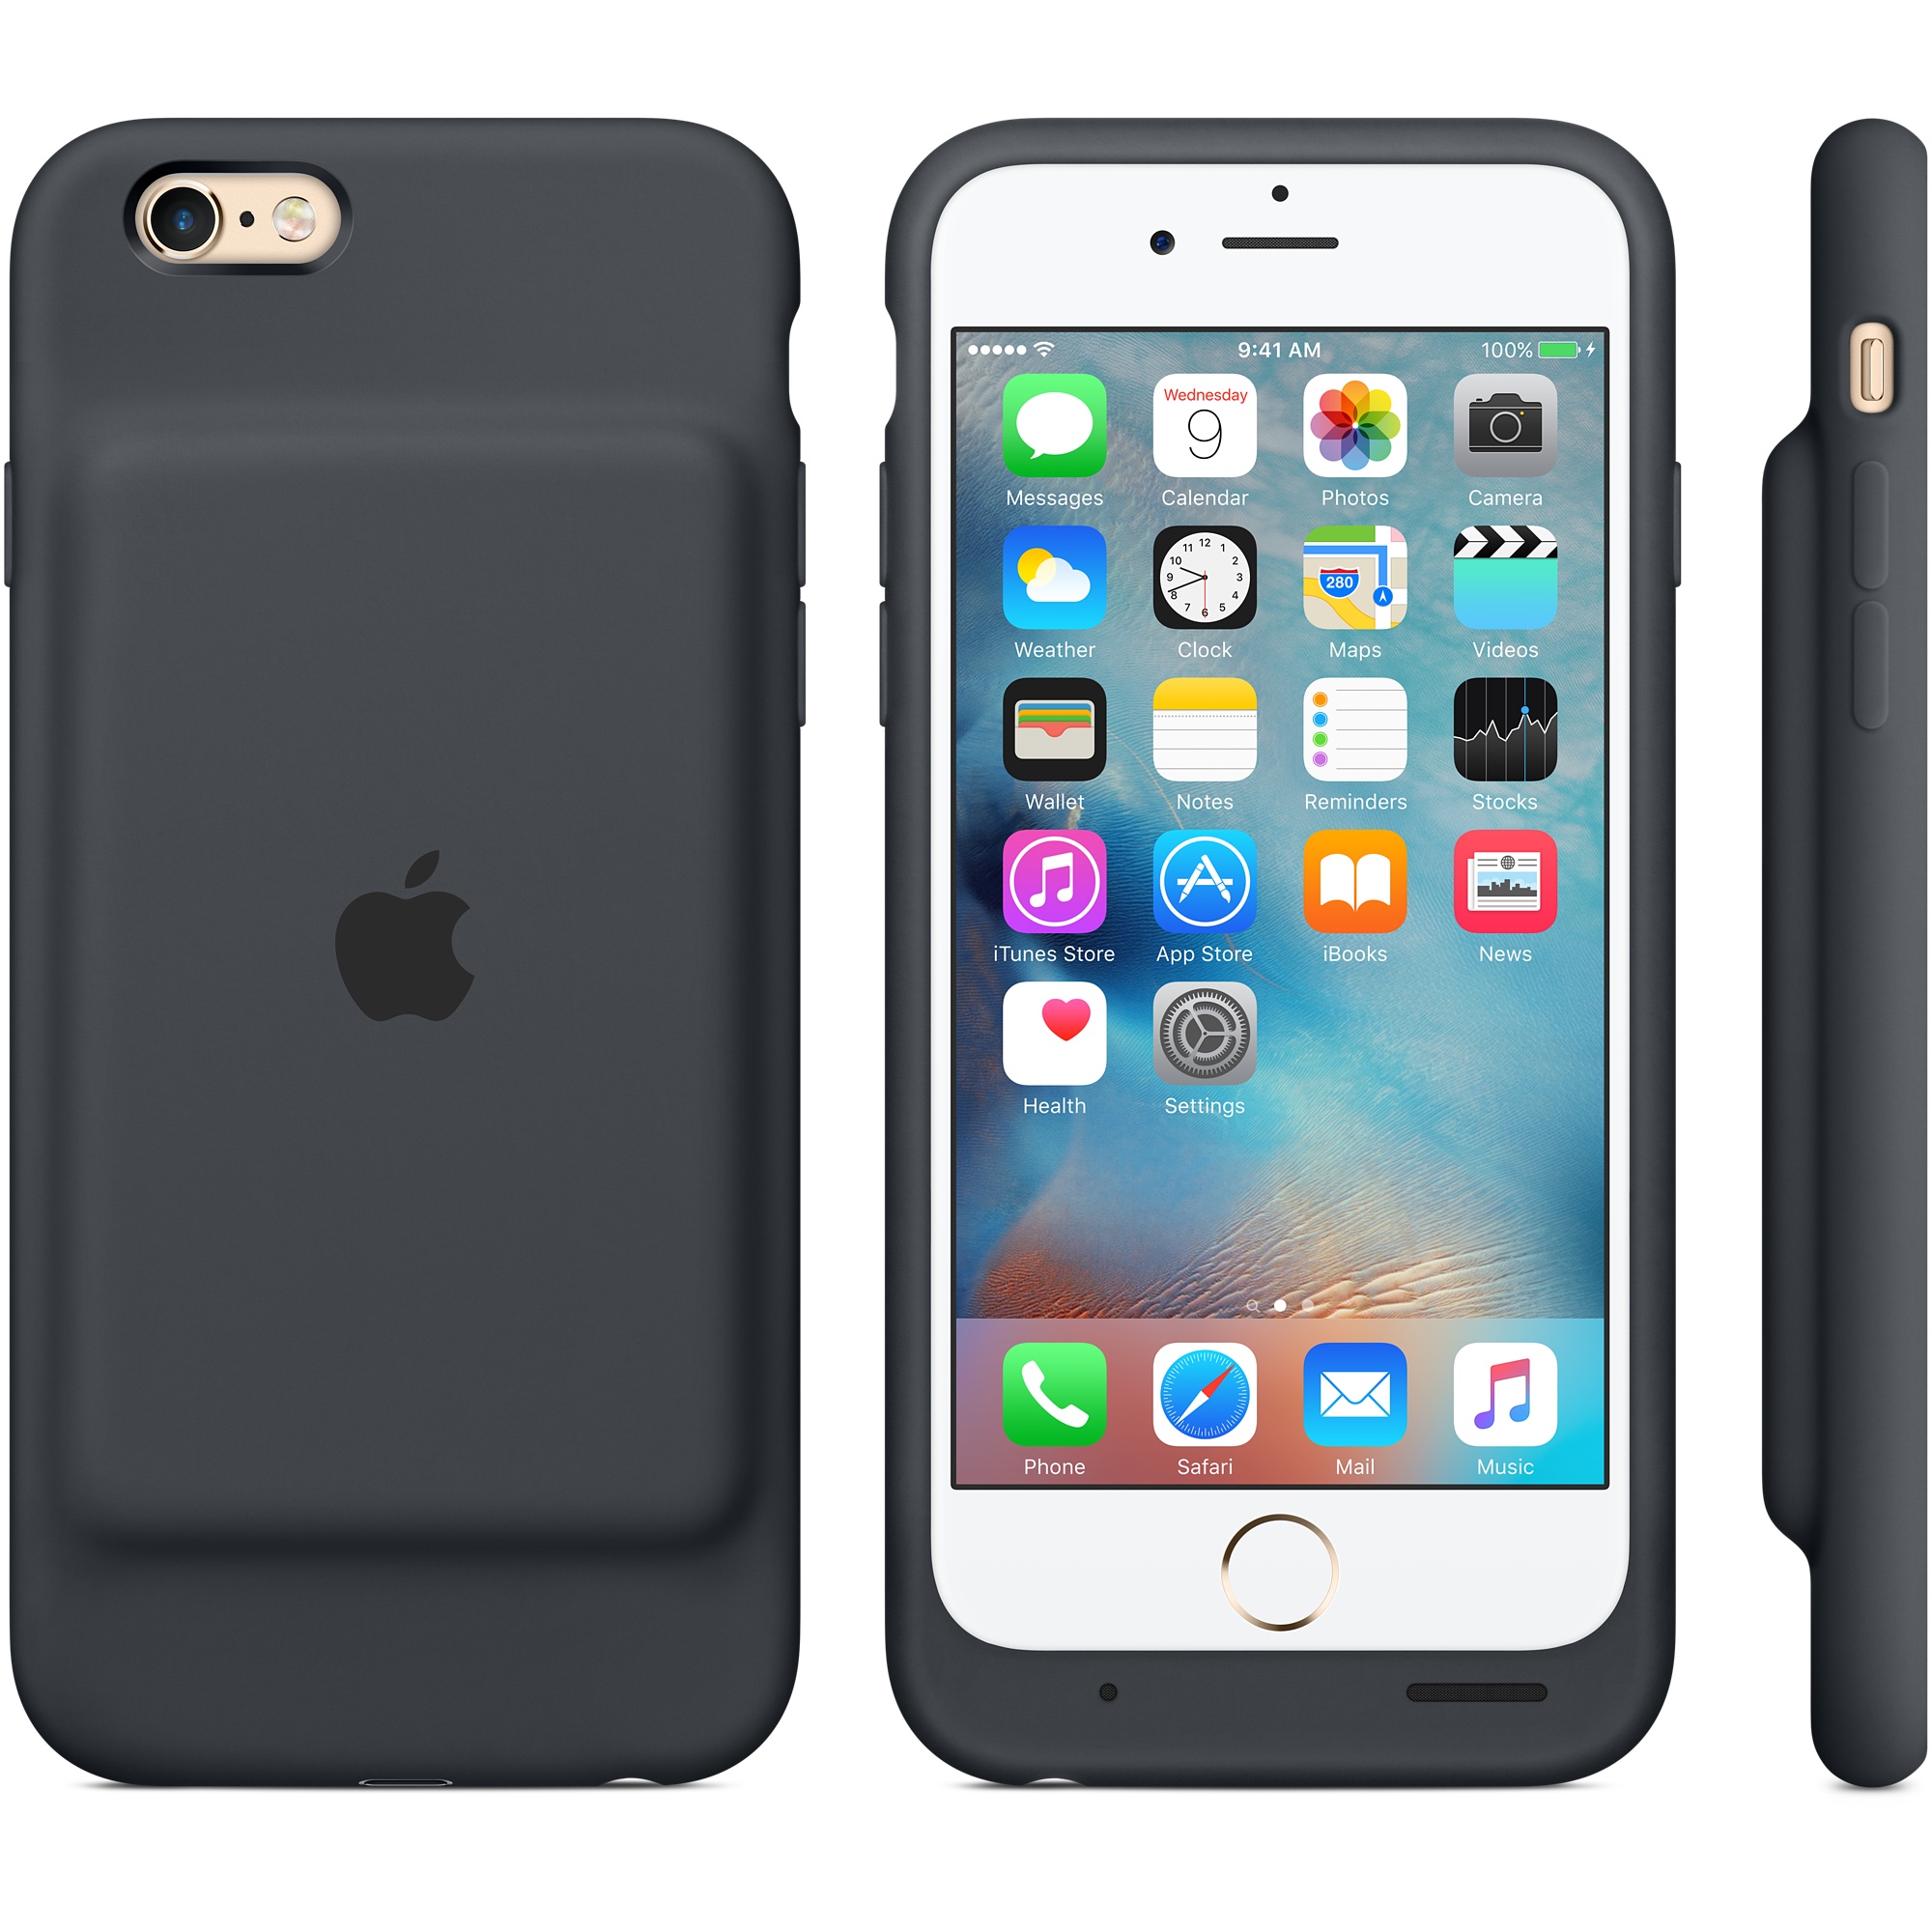 Apple launches Smart Battery Case to extend iPhone 6 and 6s battery life. Campaigns of the World®